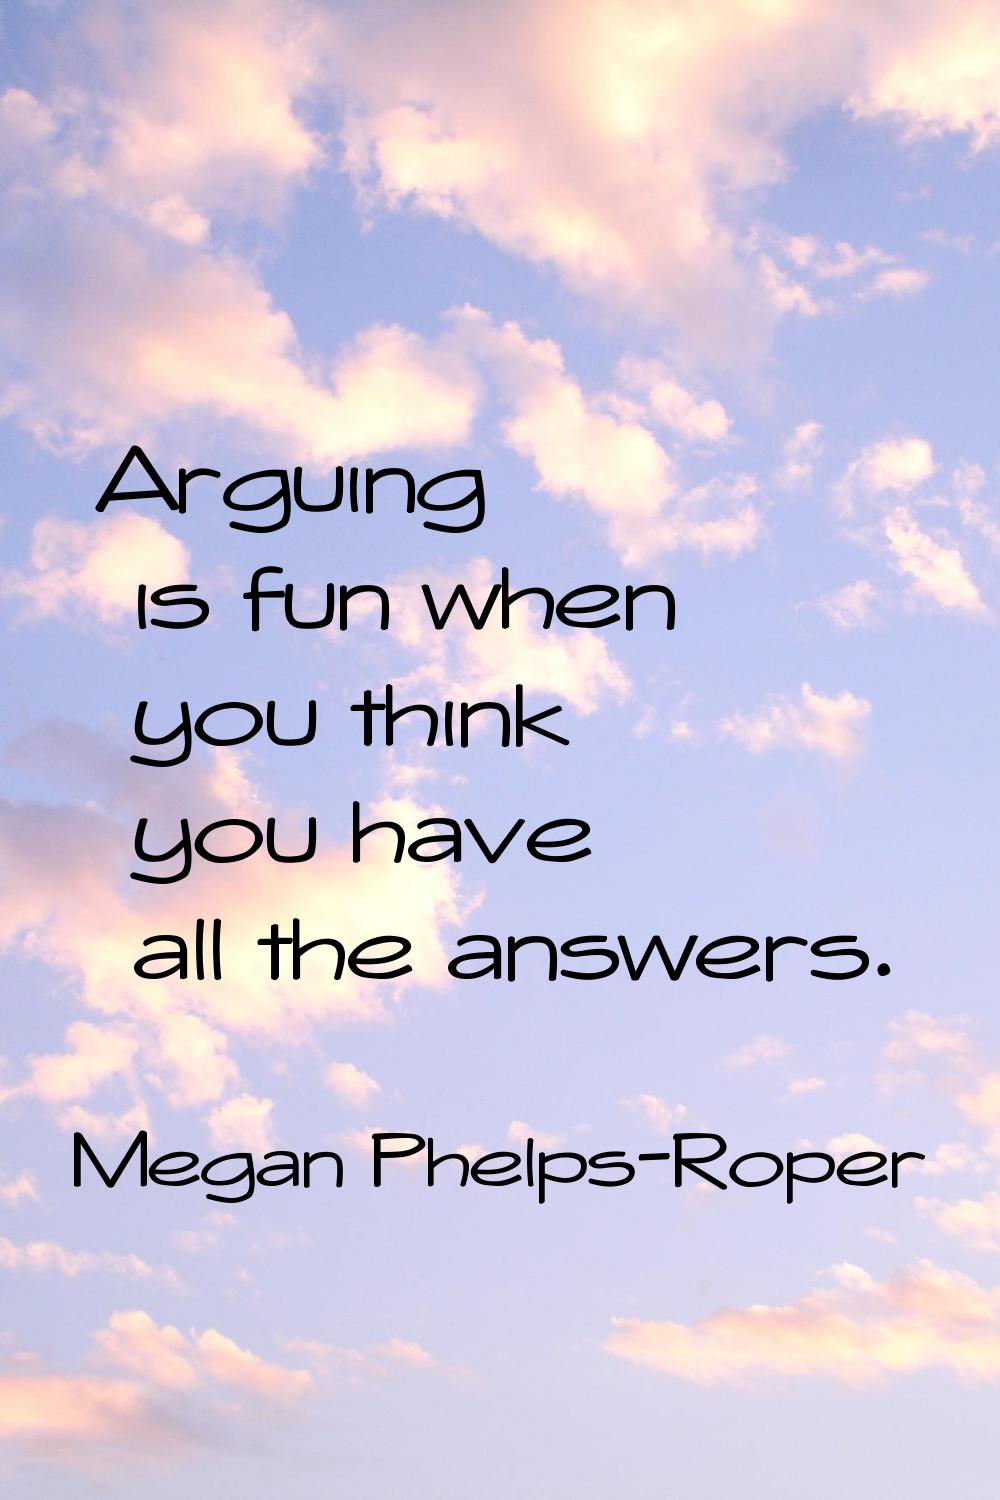 Arguing is fun when you think you have all the answers.